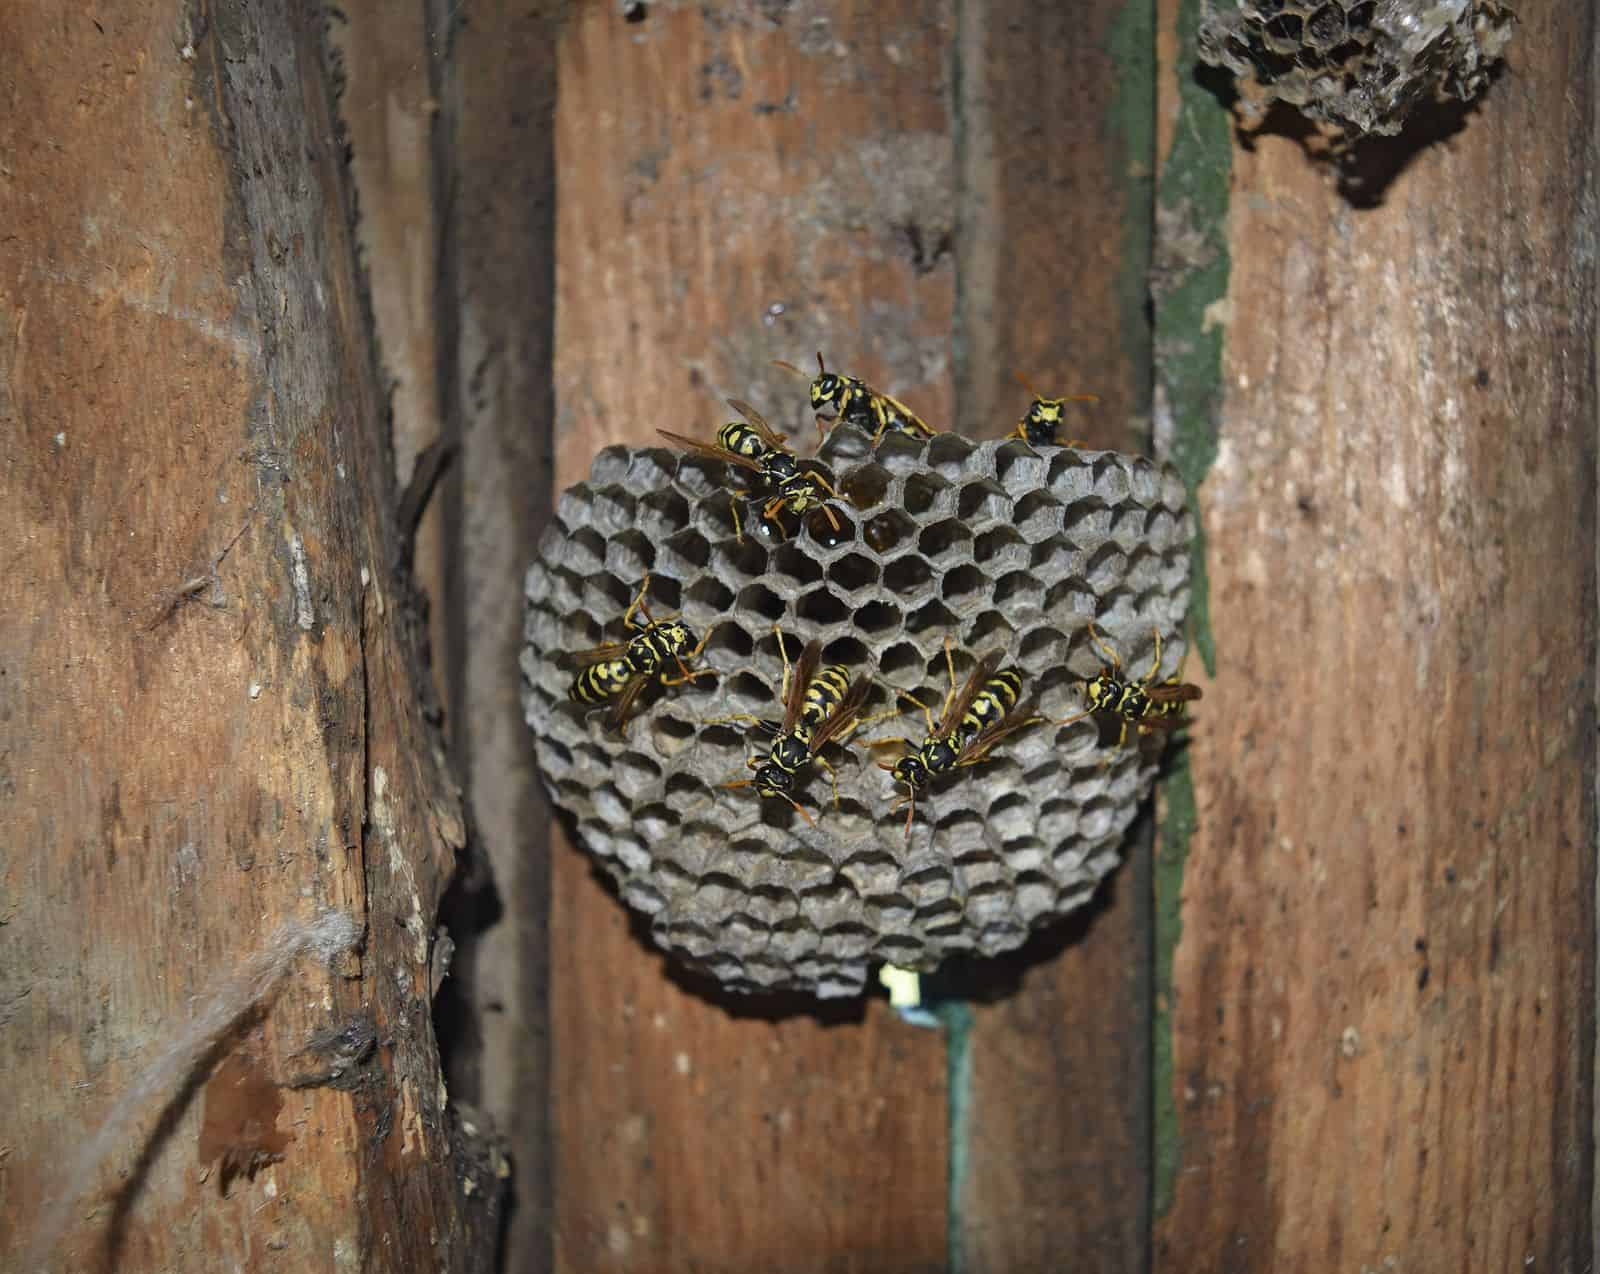 Methods for Removing Hornet or Wasp Nests